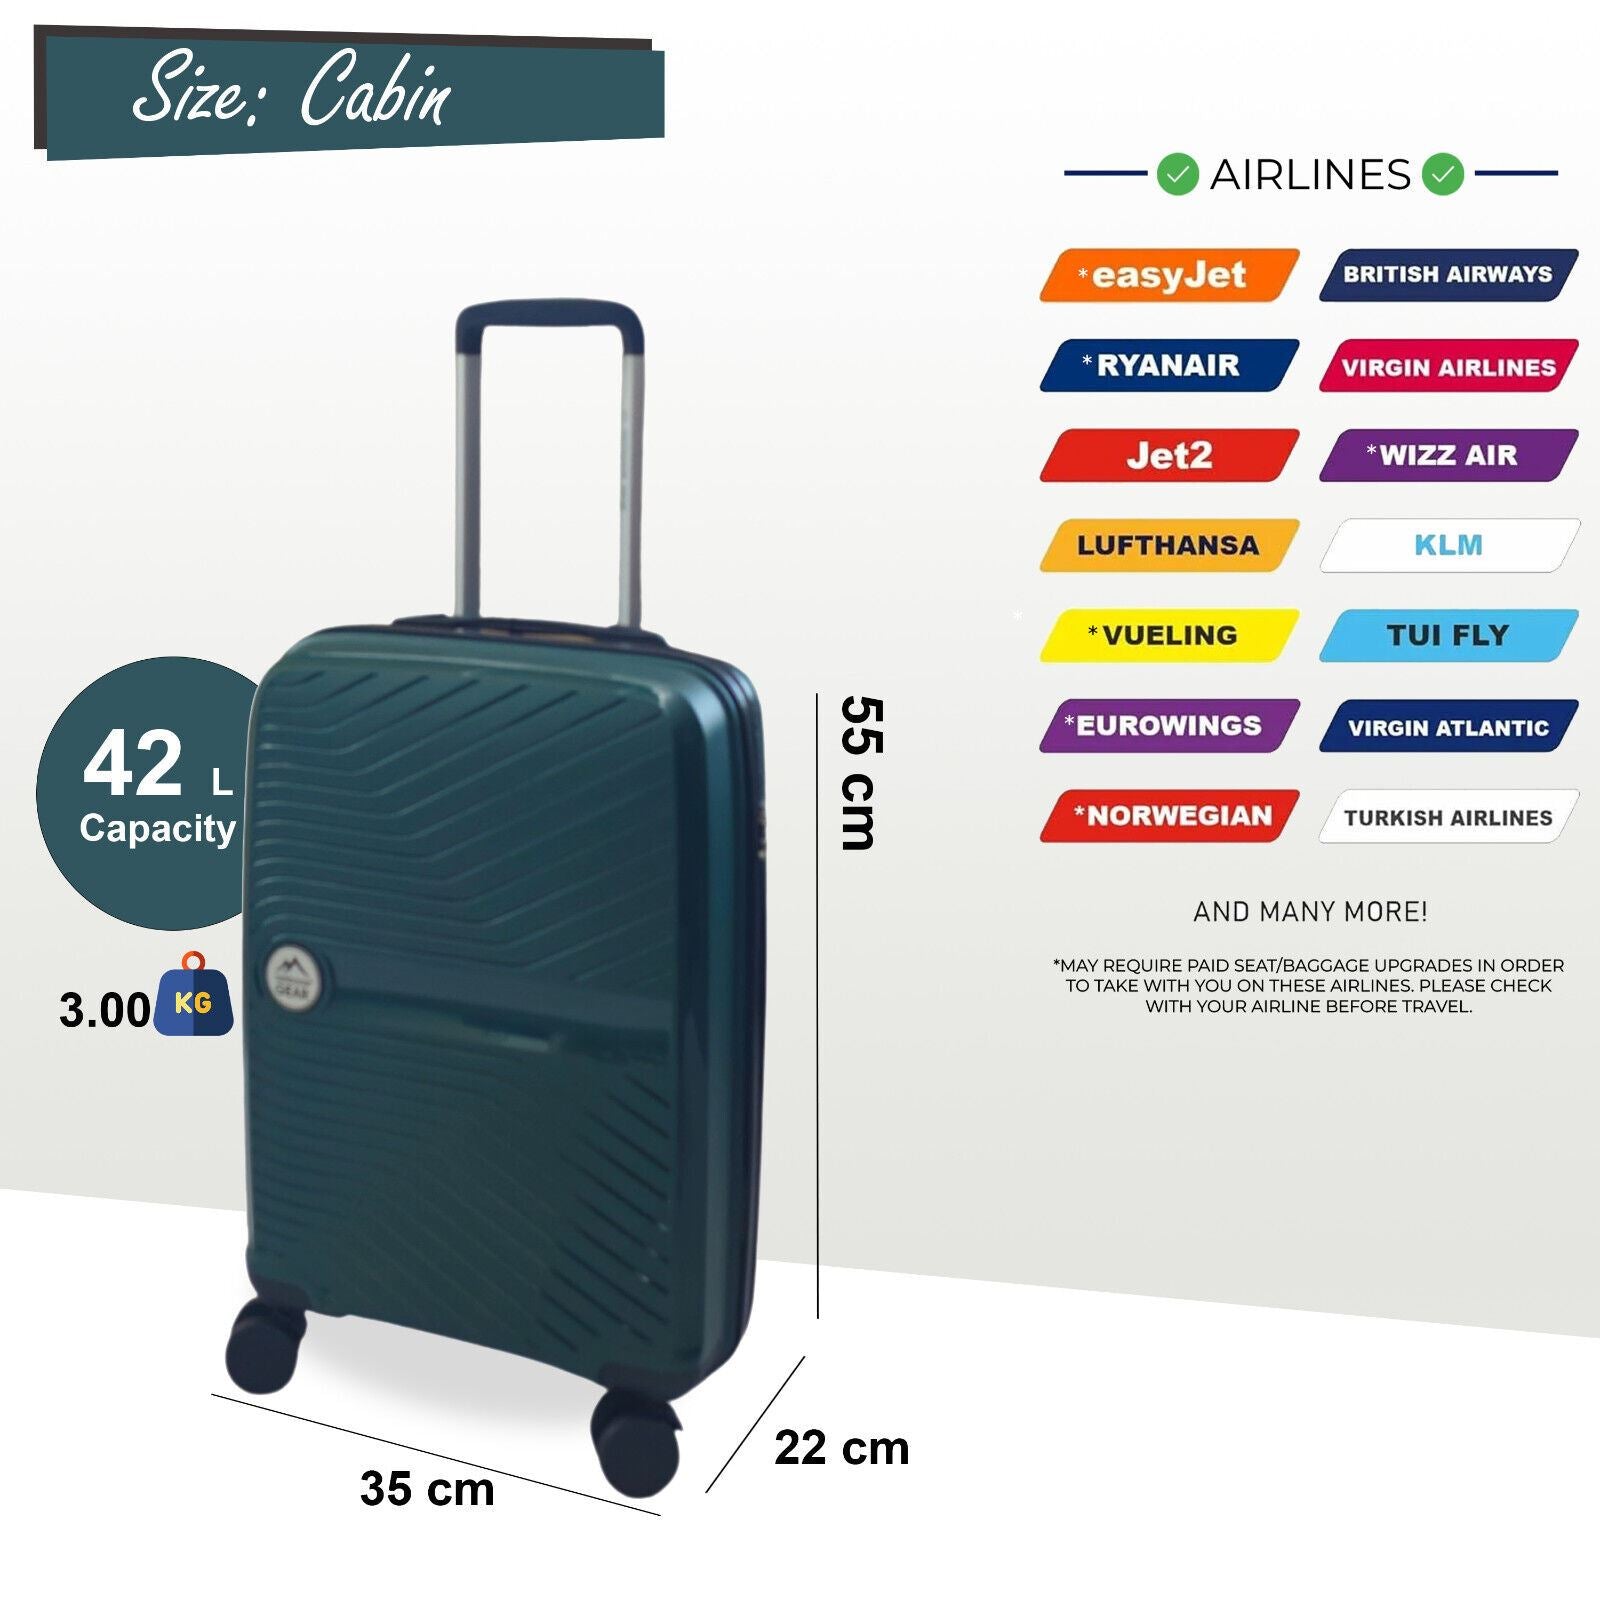 Abbeville Cabin Hard Shell Suitcase in Green